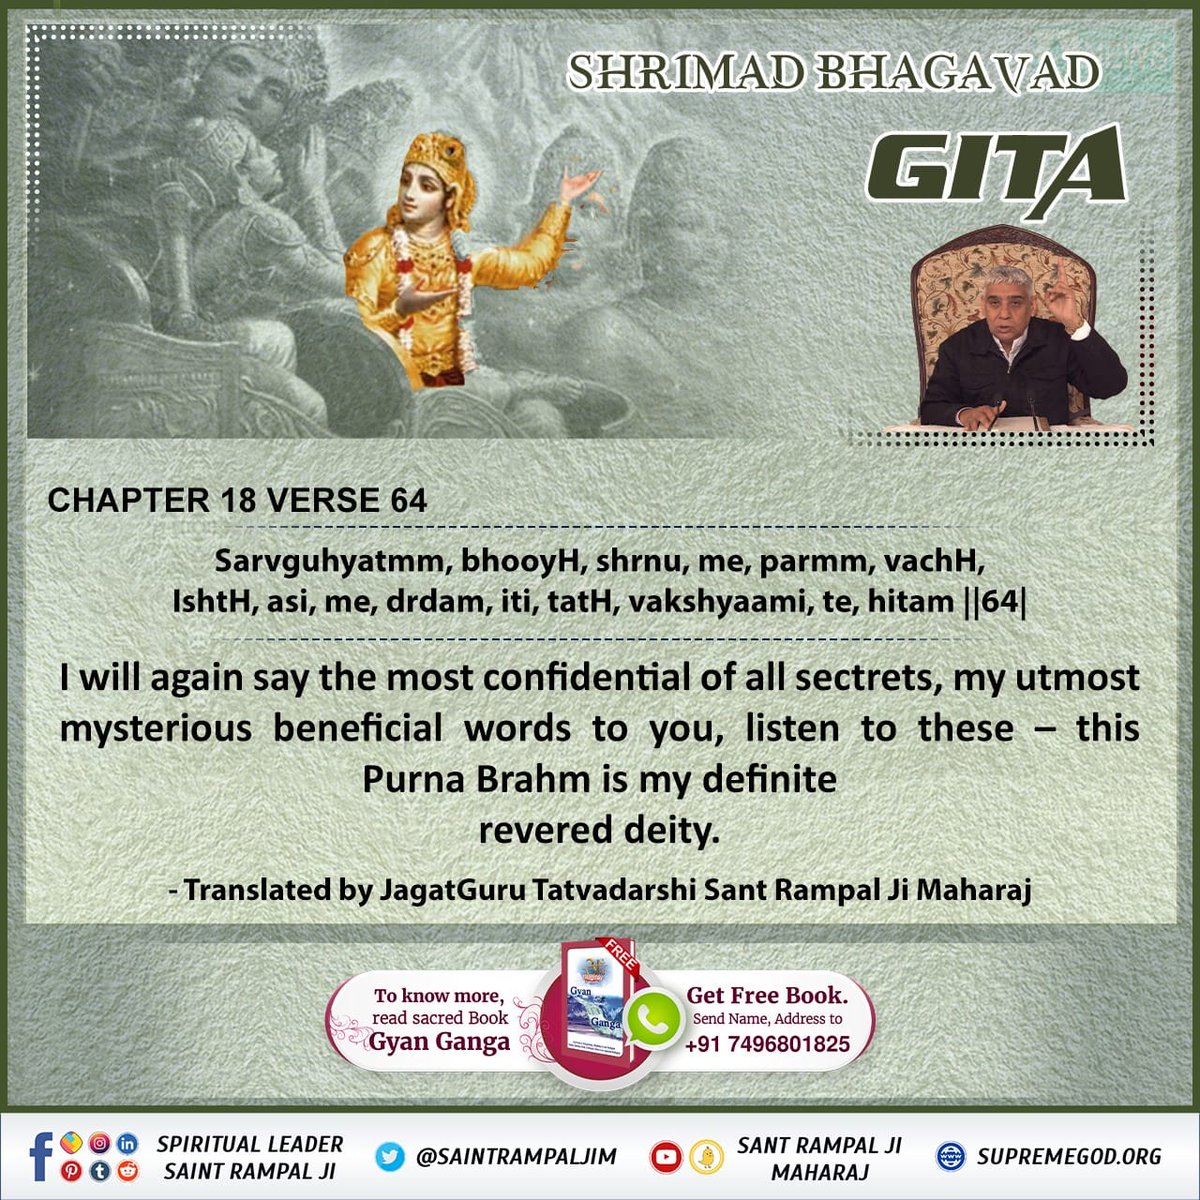 #Godmorningsunday
#noidagbnup16
I will again say the most confidential of all sectrets, my utmost mysterious beneficial words to you, listen to these this - Purna Brahm is my definite revered deity.
- Translated by JagatGuru Tatvadarshi Sant Rampal Ji Maharaj